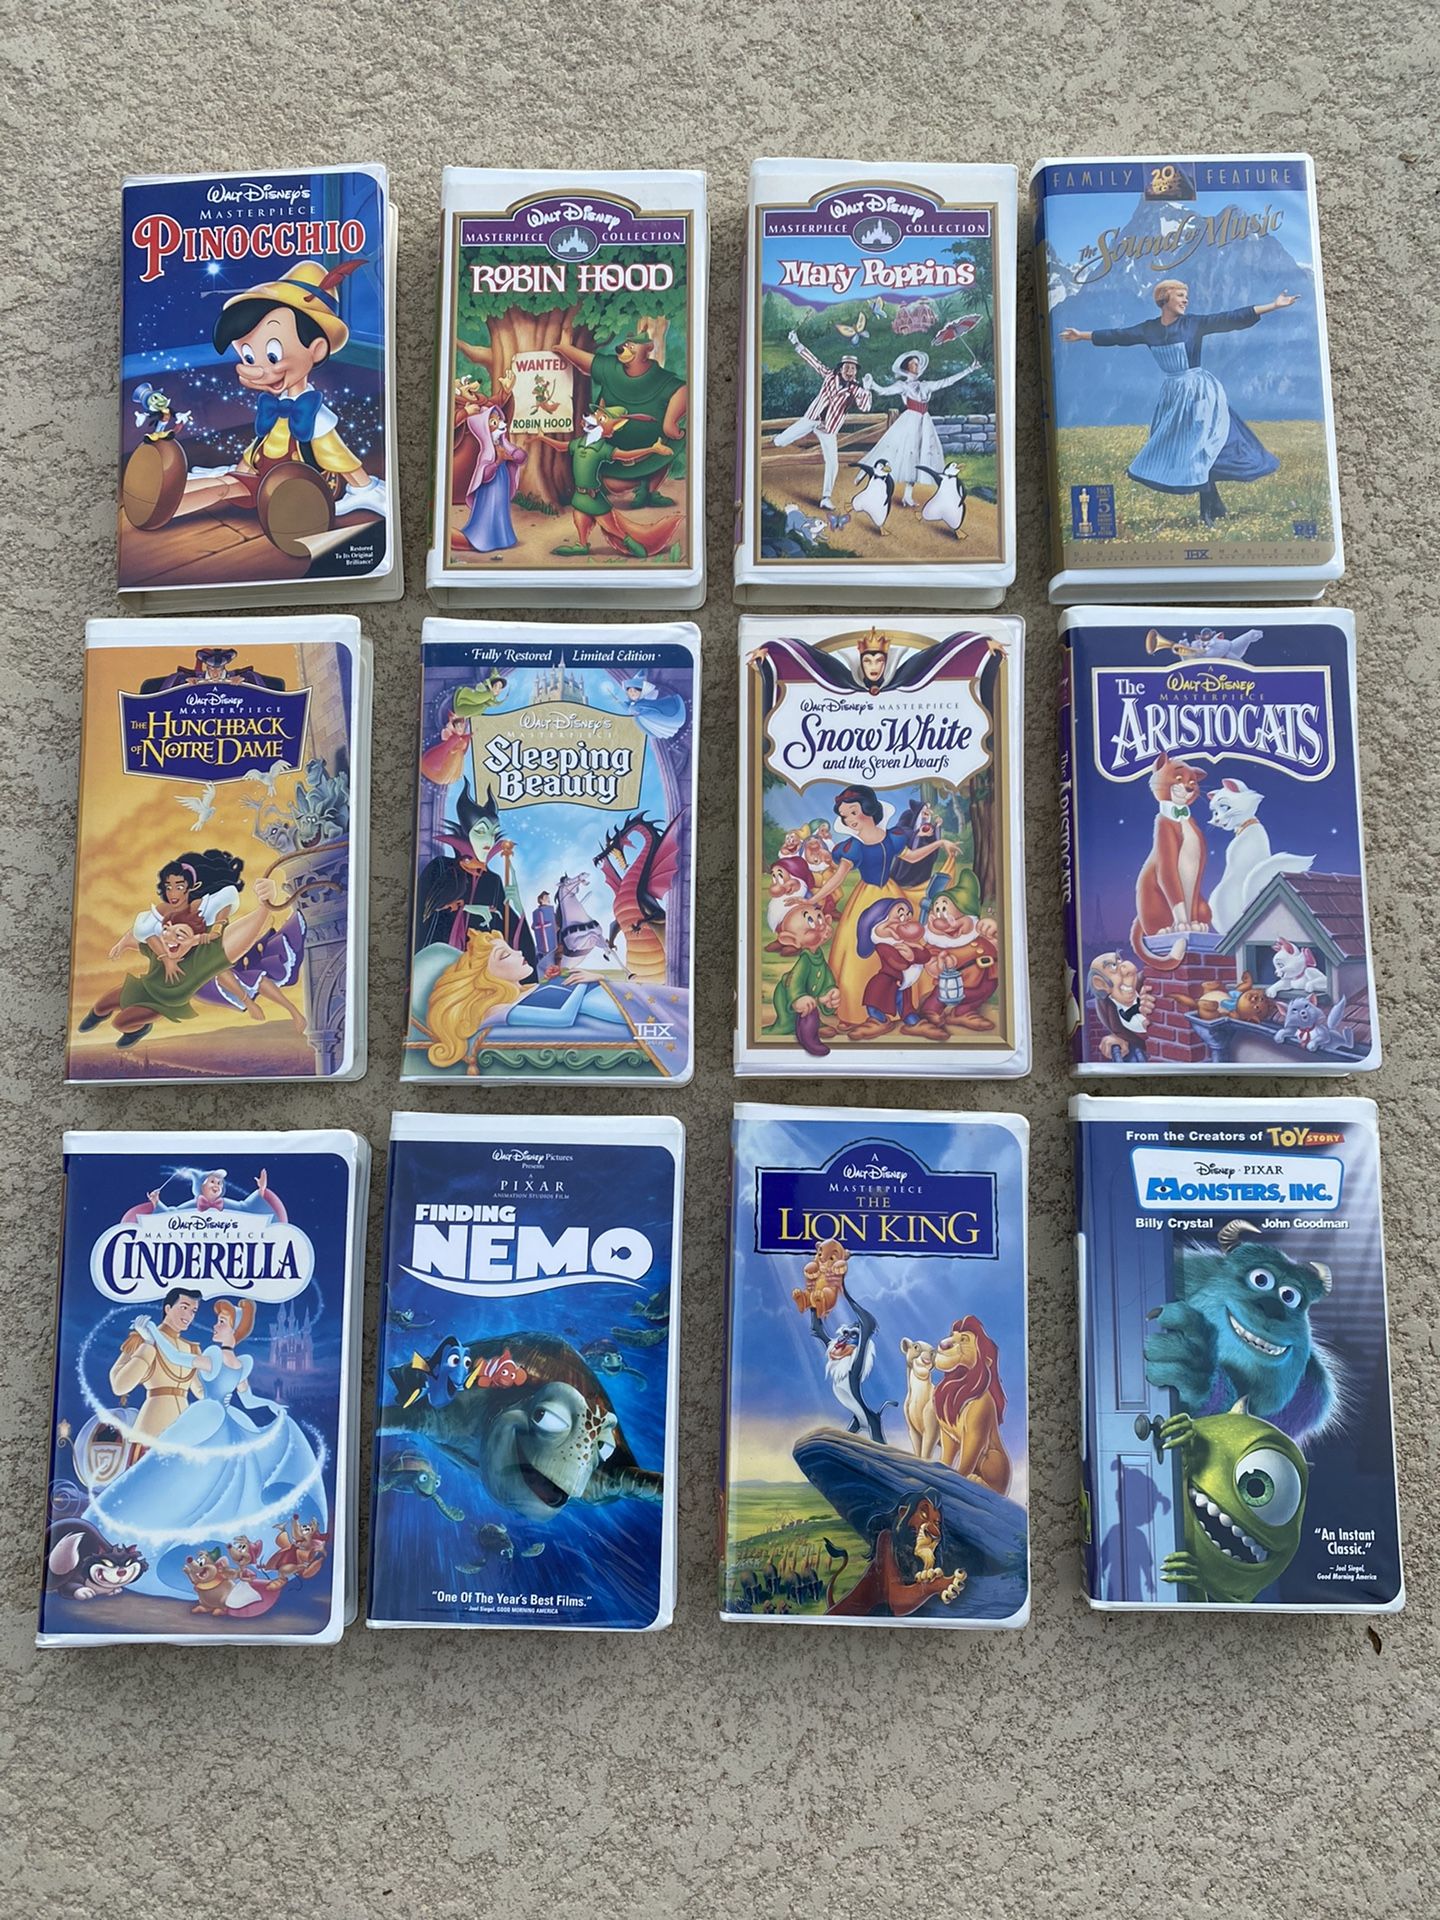 Disney VHS movies in very good condition if you still have a VCR!